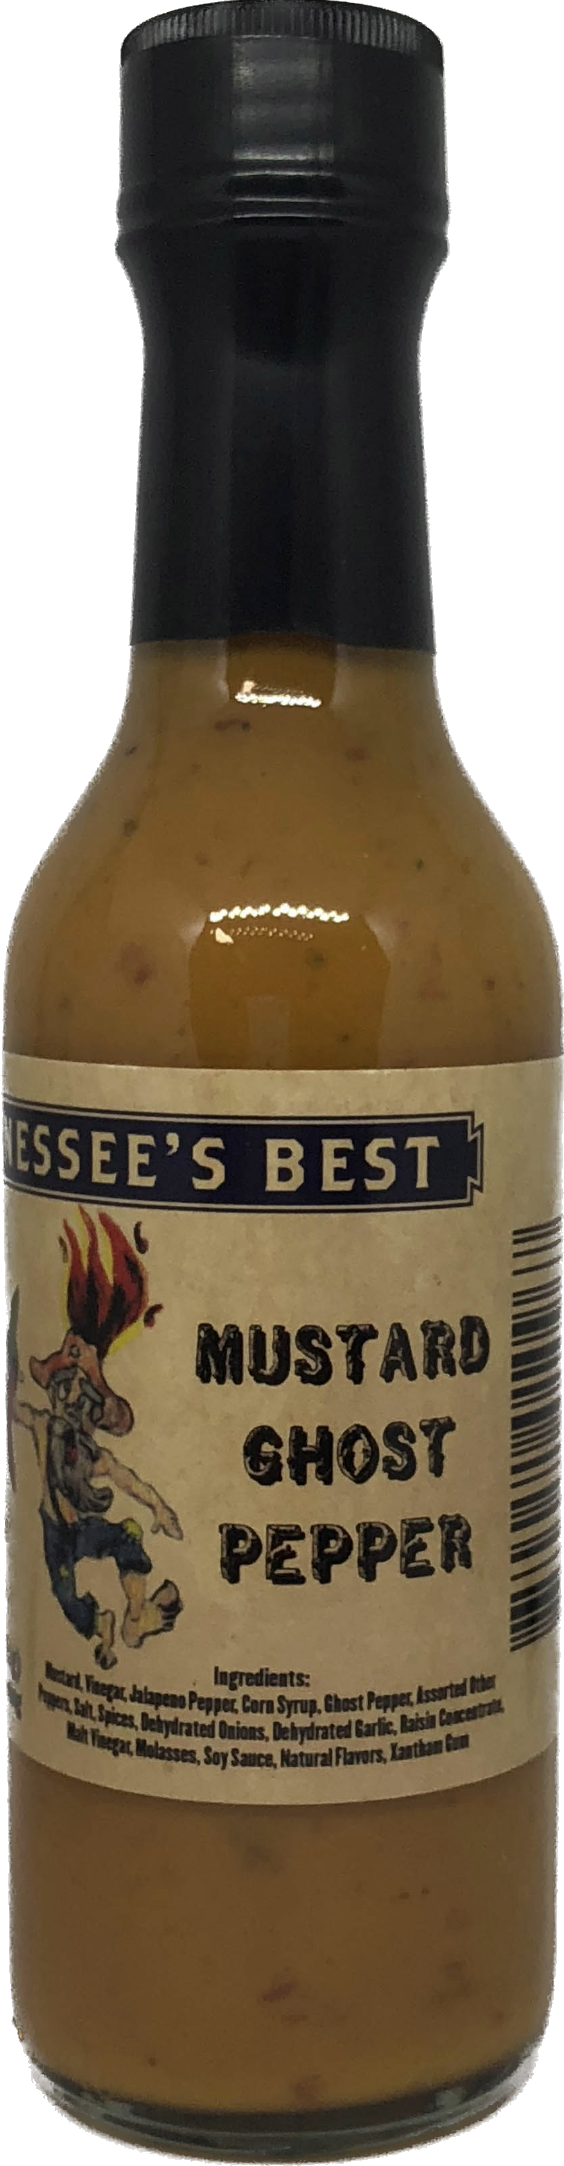 Tennessee's Best Old Fashion Style Hot Sauces